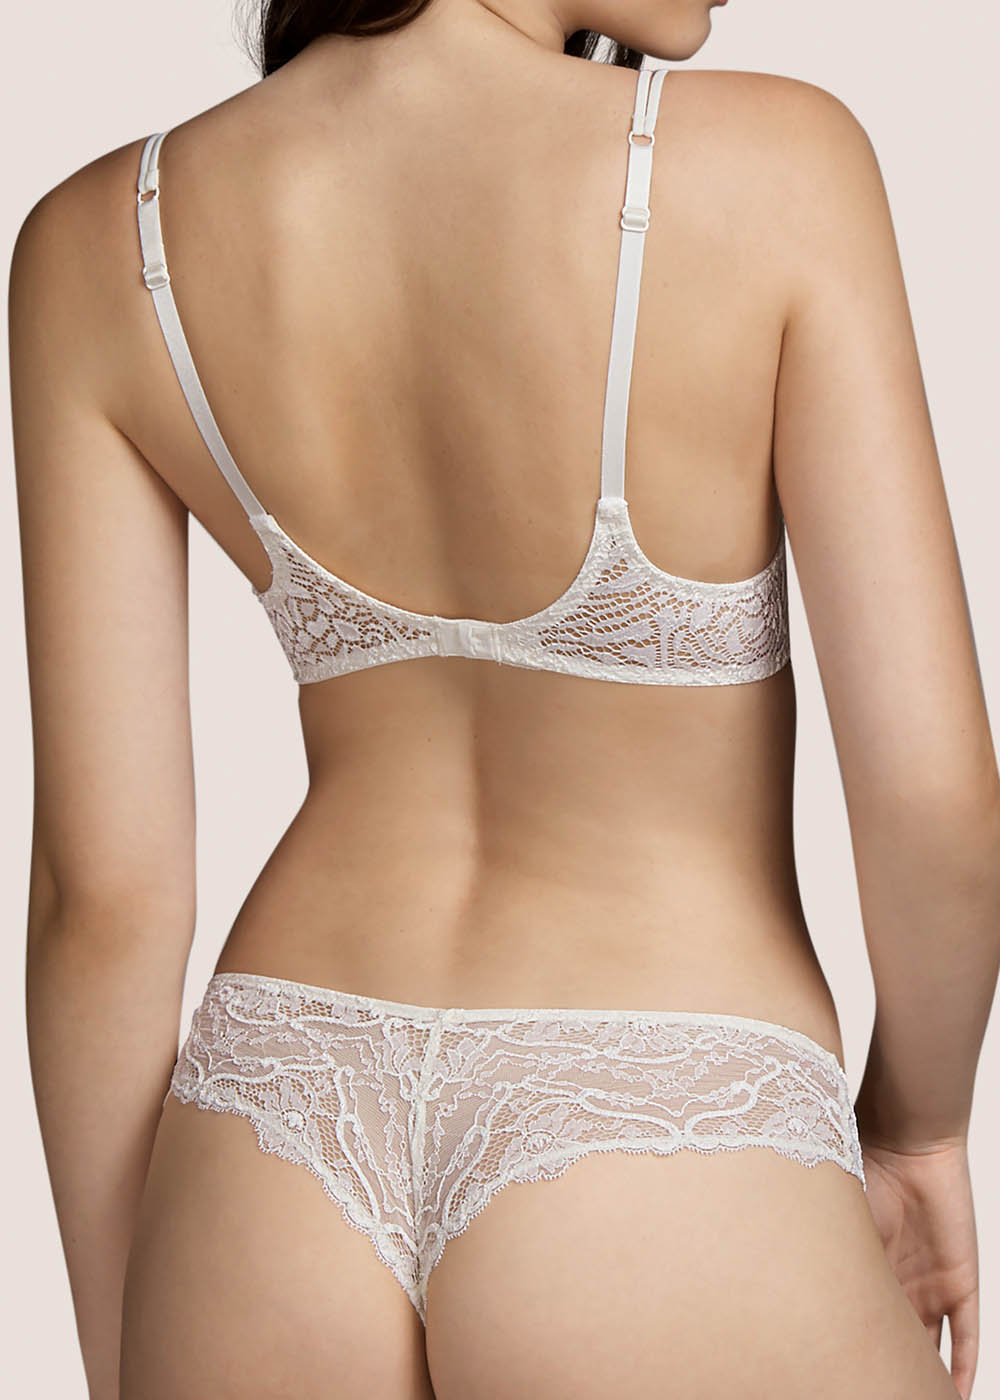 Soutien-gorge Push Up Coussinets Amovibles  Armatures Andres Sarda Chantilly